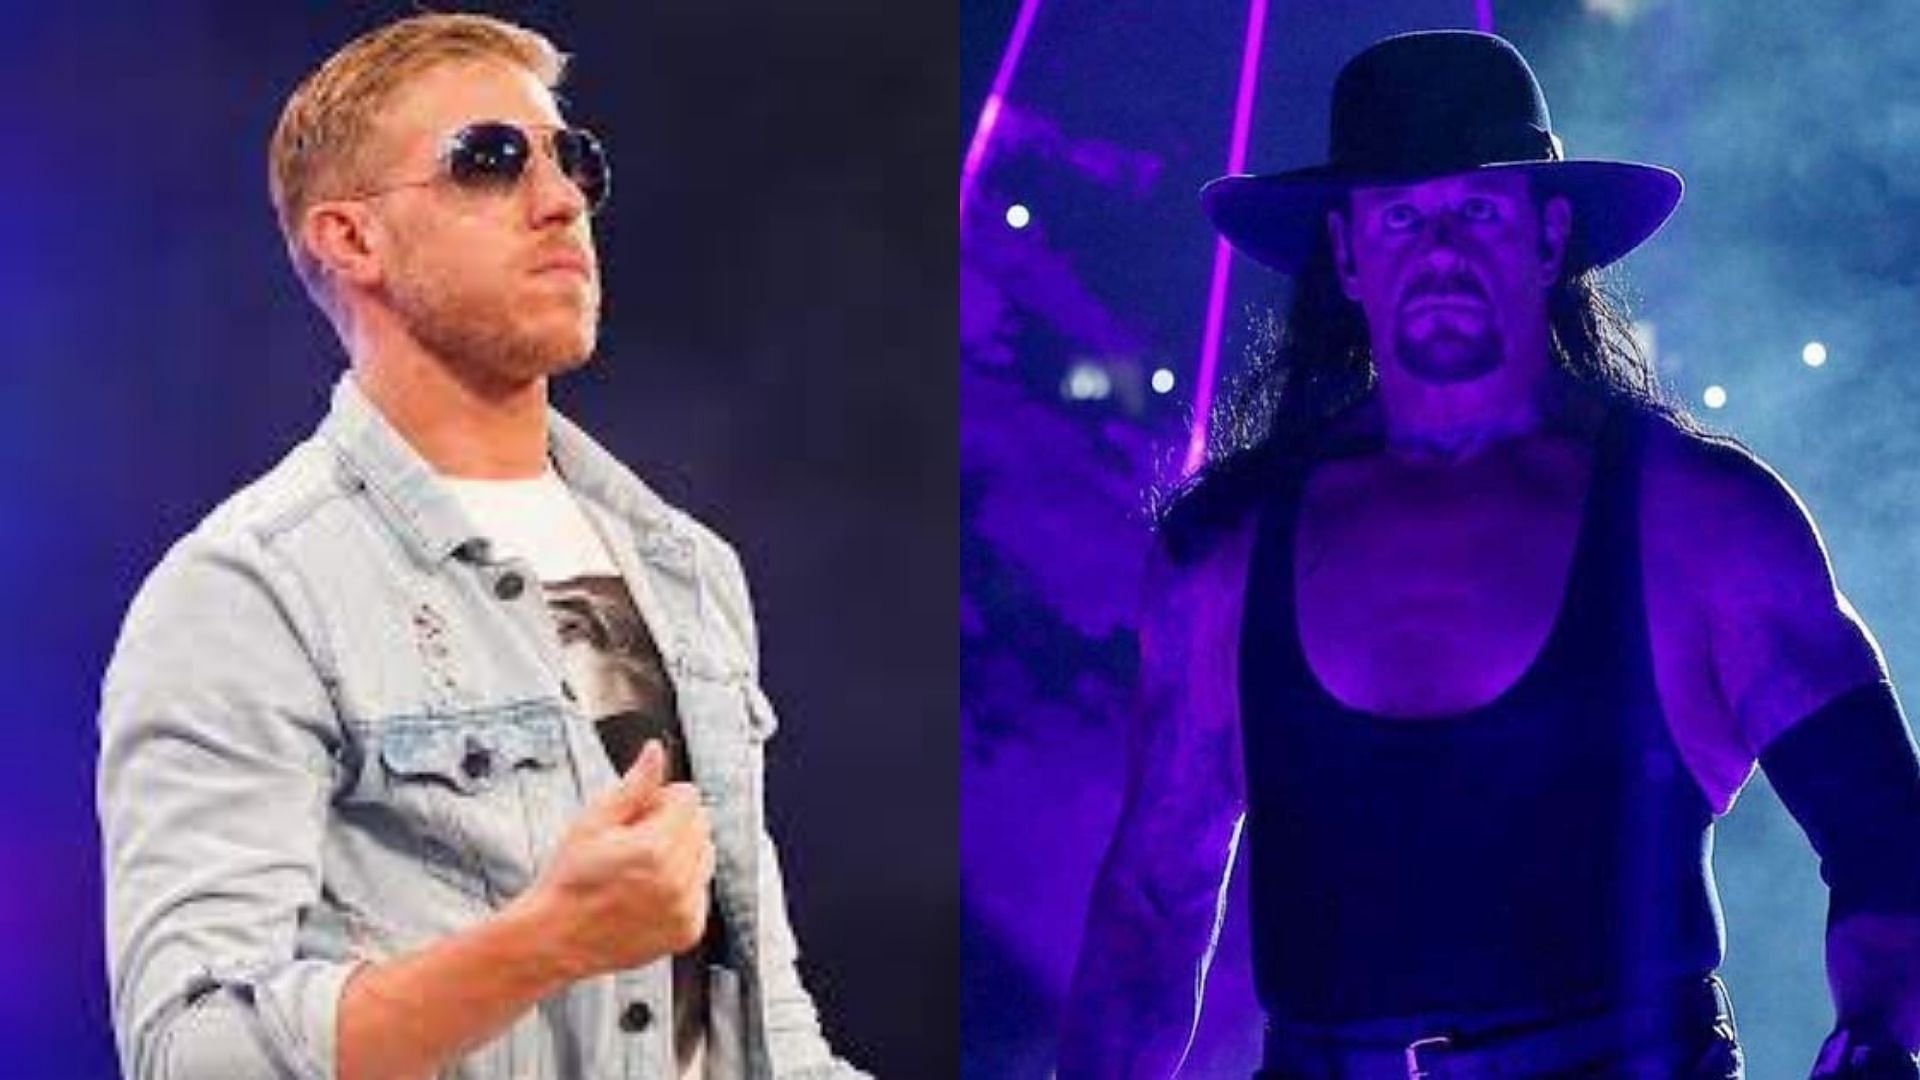 Orange Cassidy (left) and The Undertaker (right).